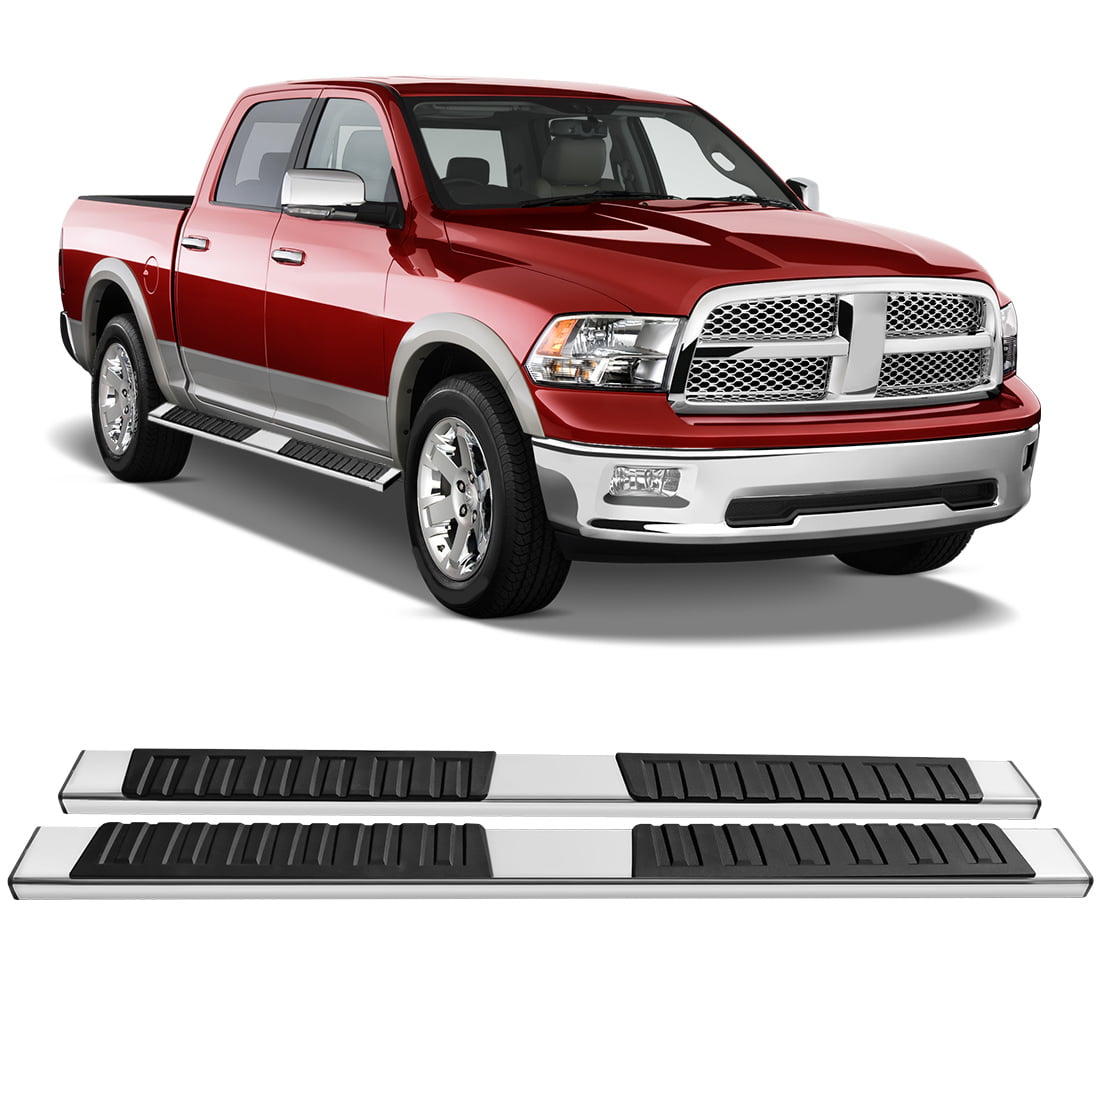 Chrome For Dodge Ram 1500/2500/3500 Crew Cab 6 inches Side Step Nerf Bar Running Board